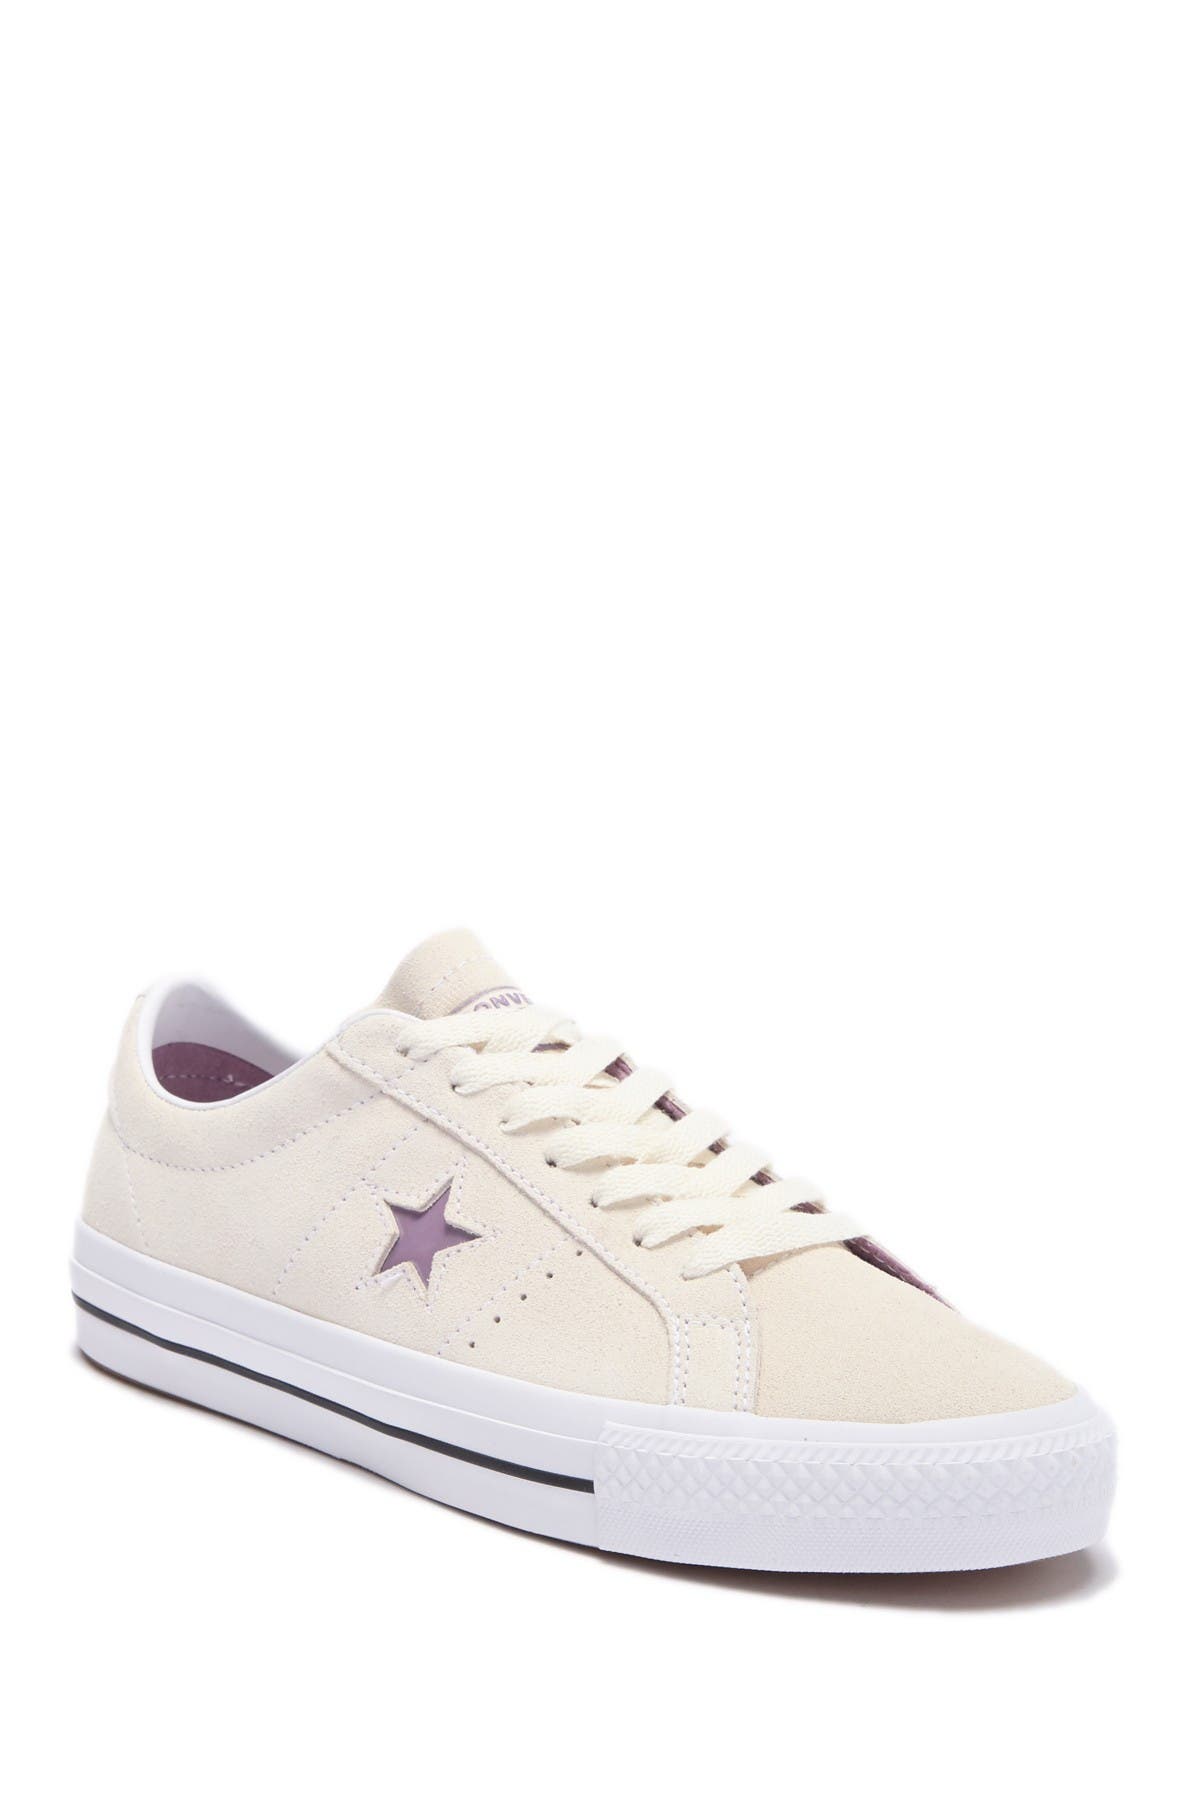 Converse | One Star Pro OX Suede 